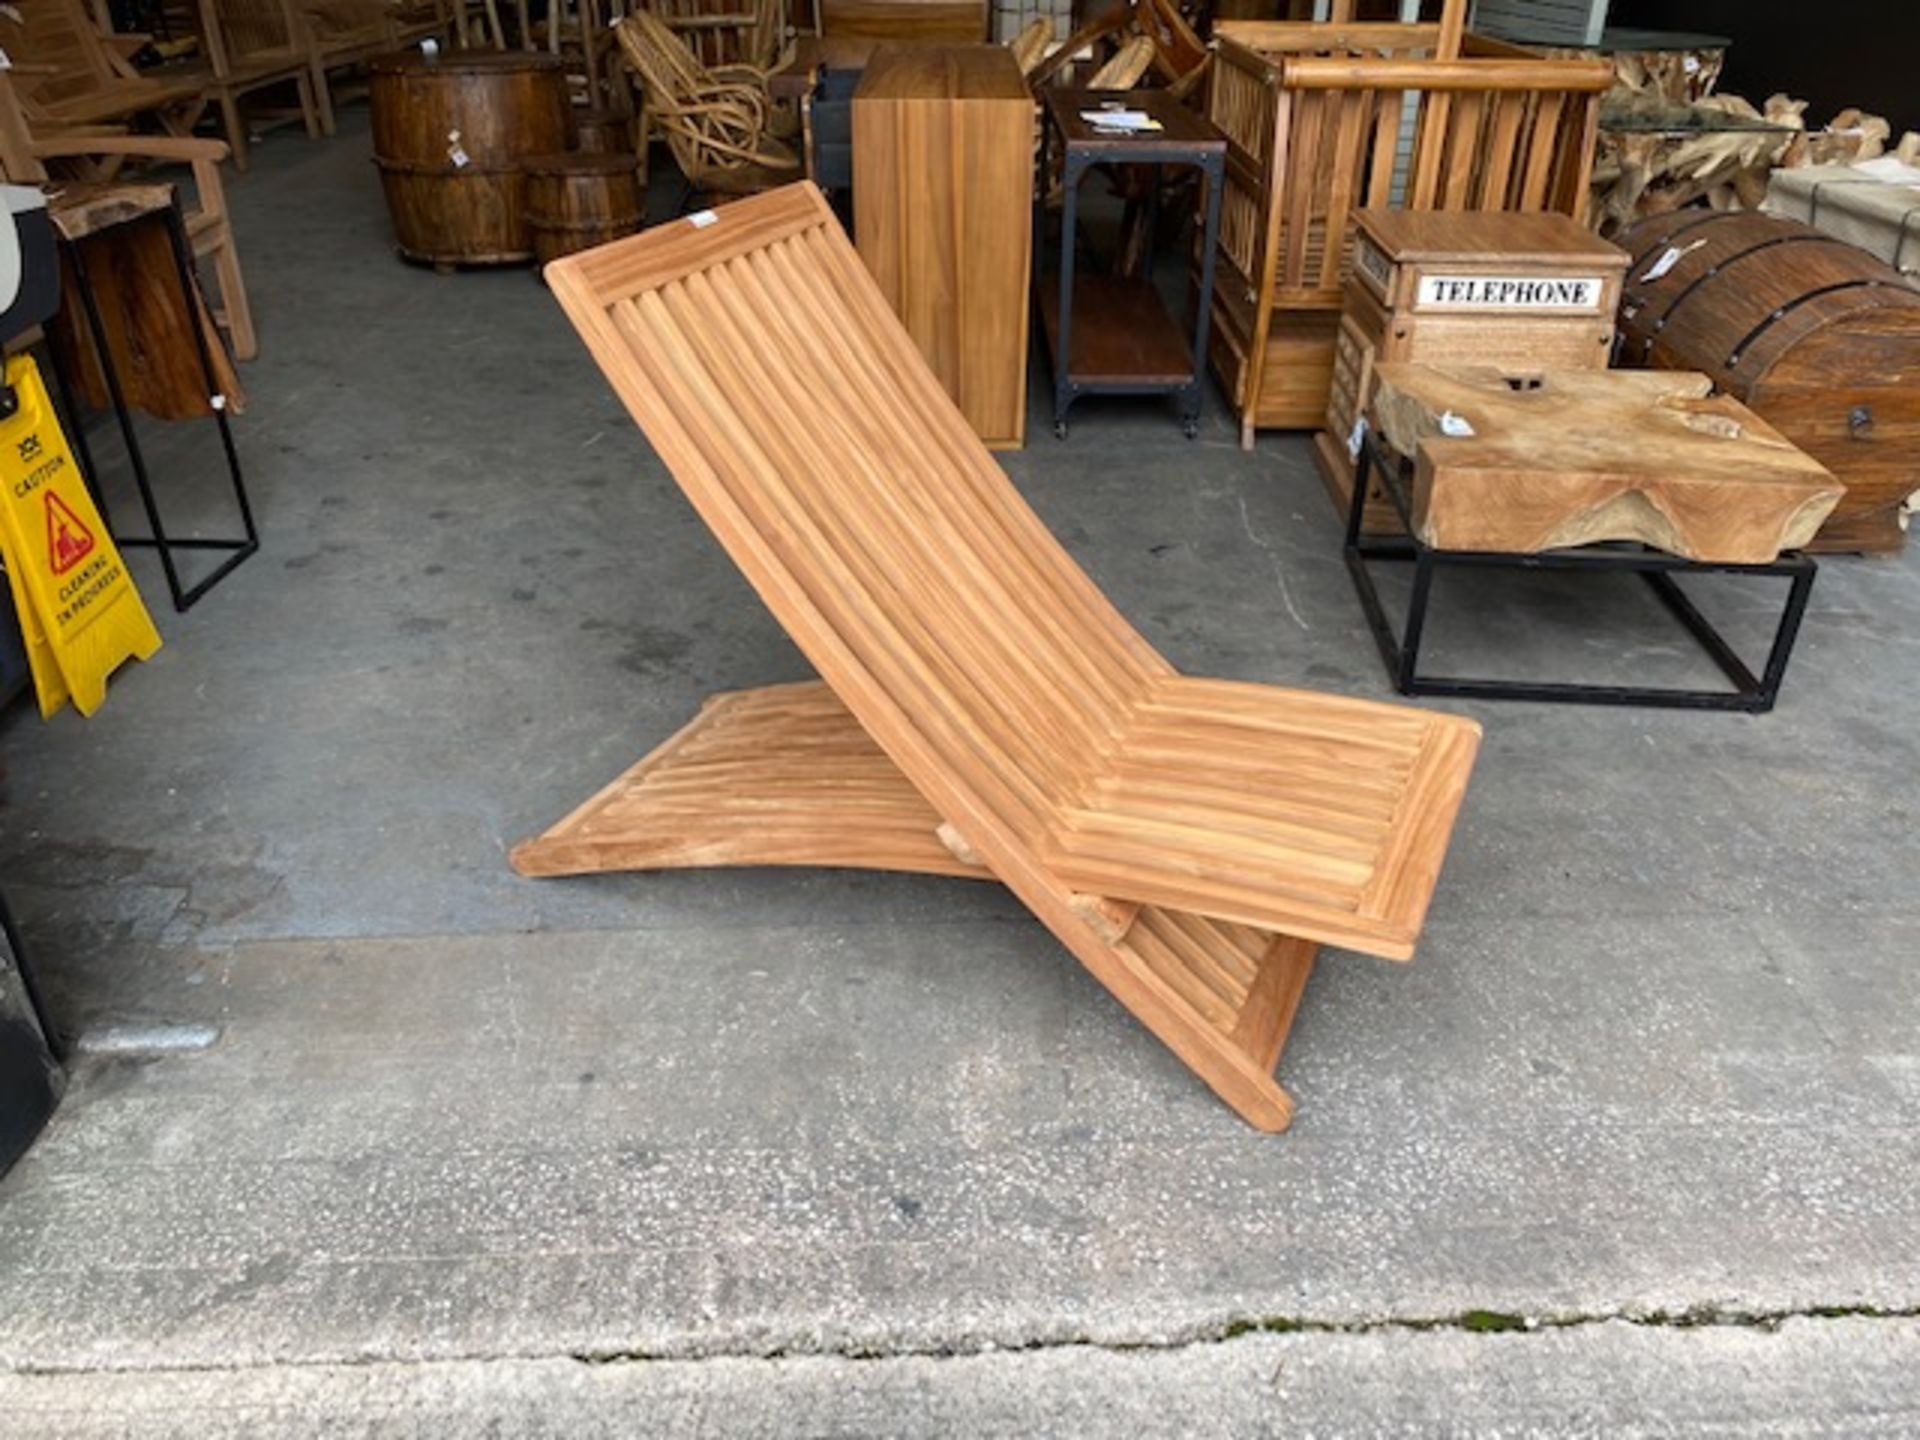 BRAND NEW SOLID TEAK WOODEN DILARA LOUNGER 178 X 60 X 75cm RRP £450 - Image 2 of 2